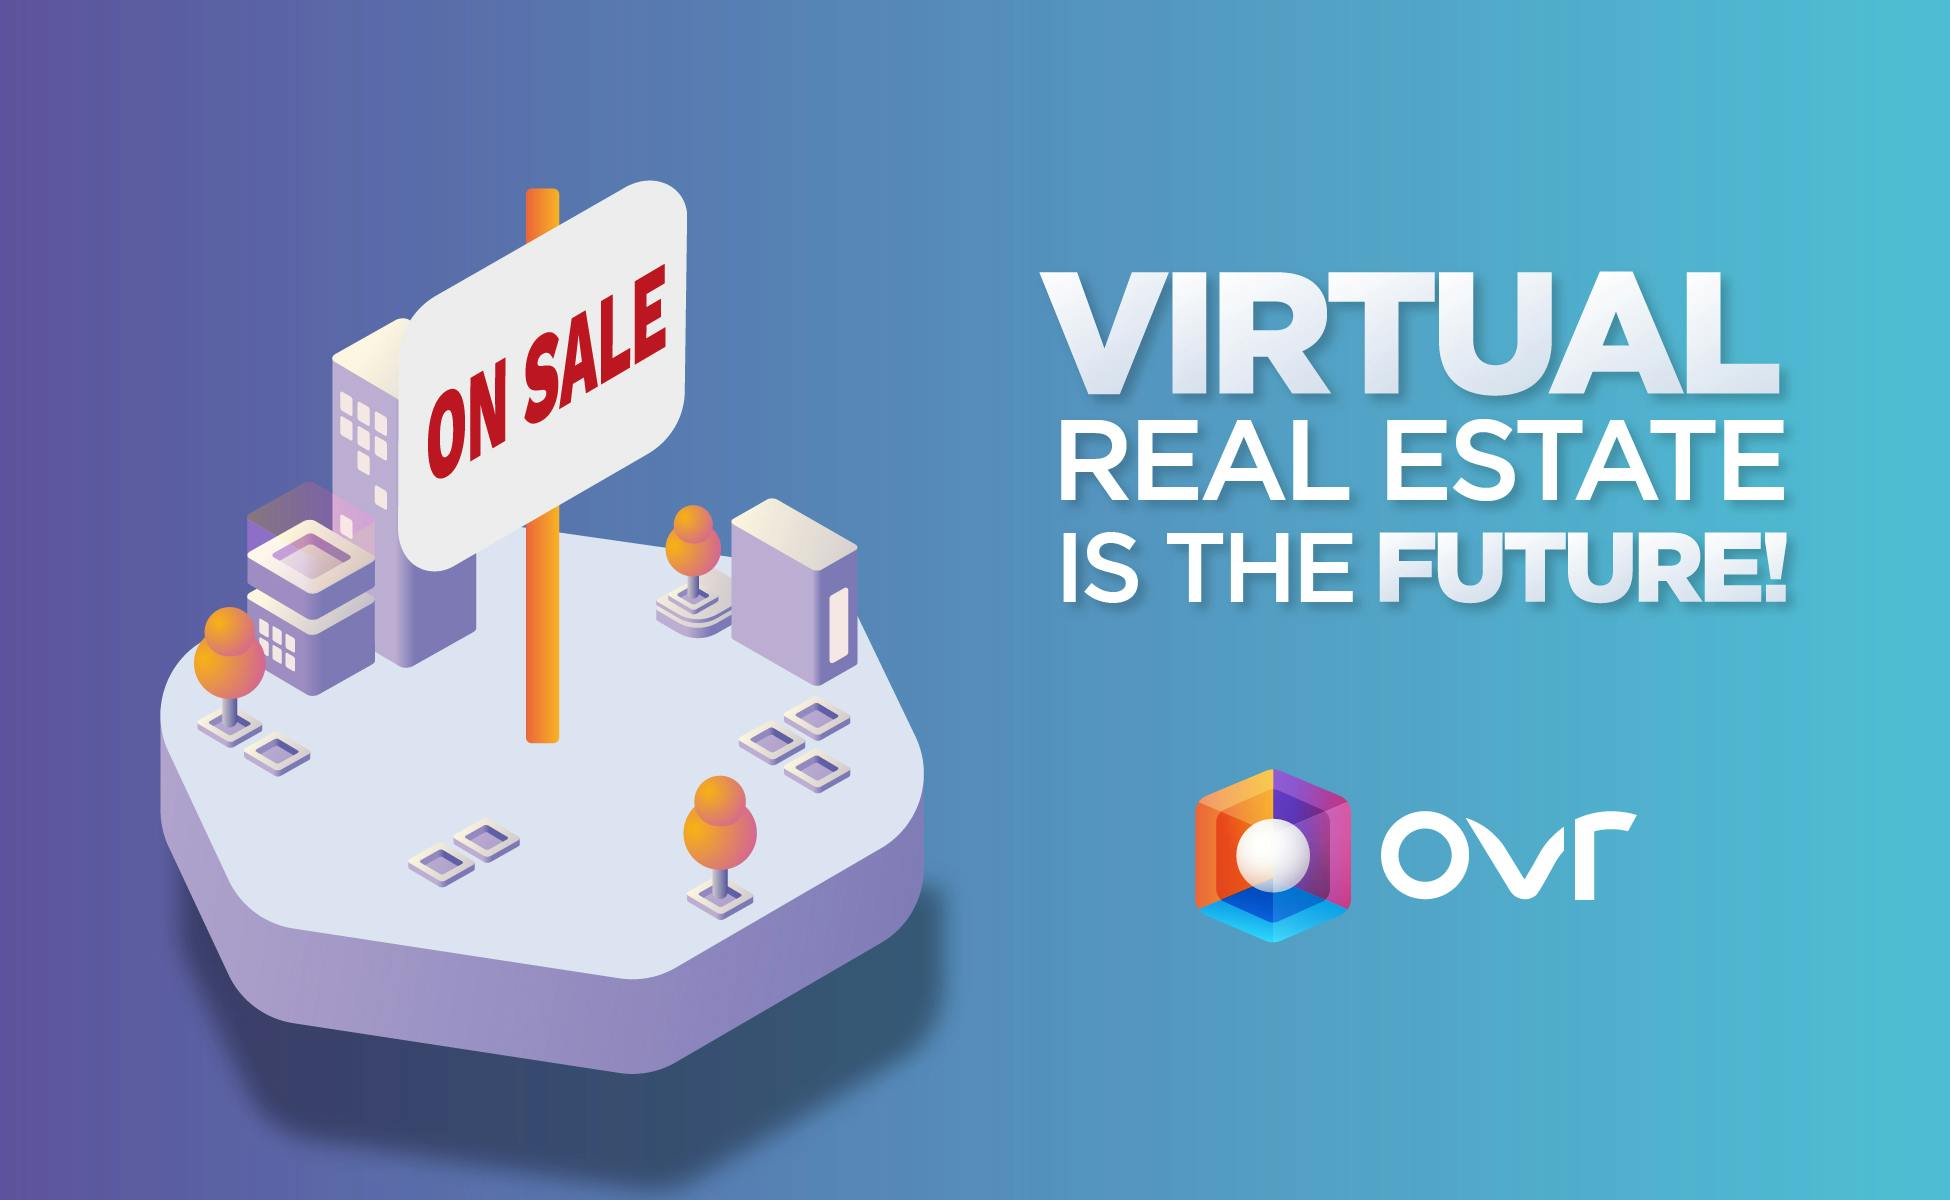 Virtual Real Estate is the Future, Are You in?